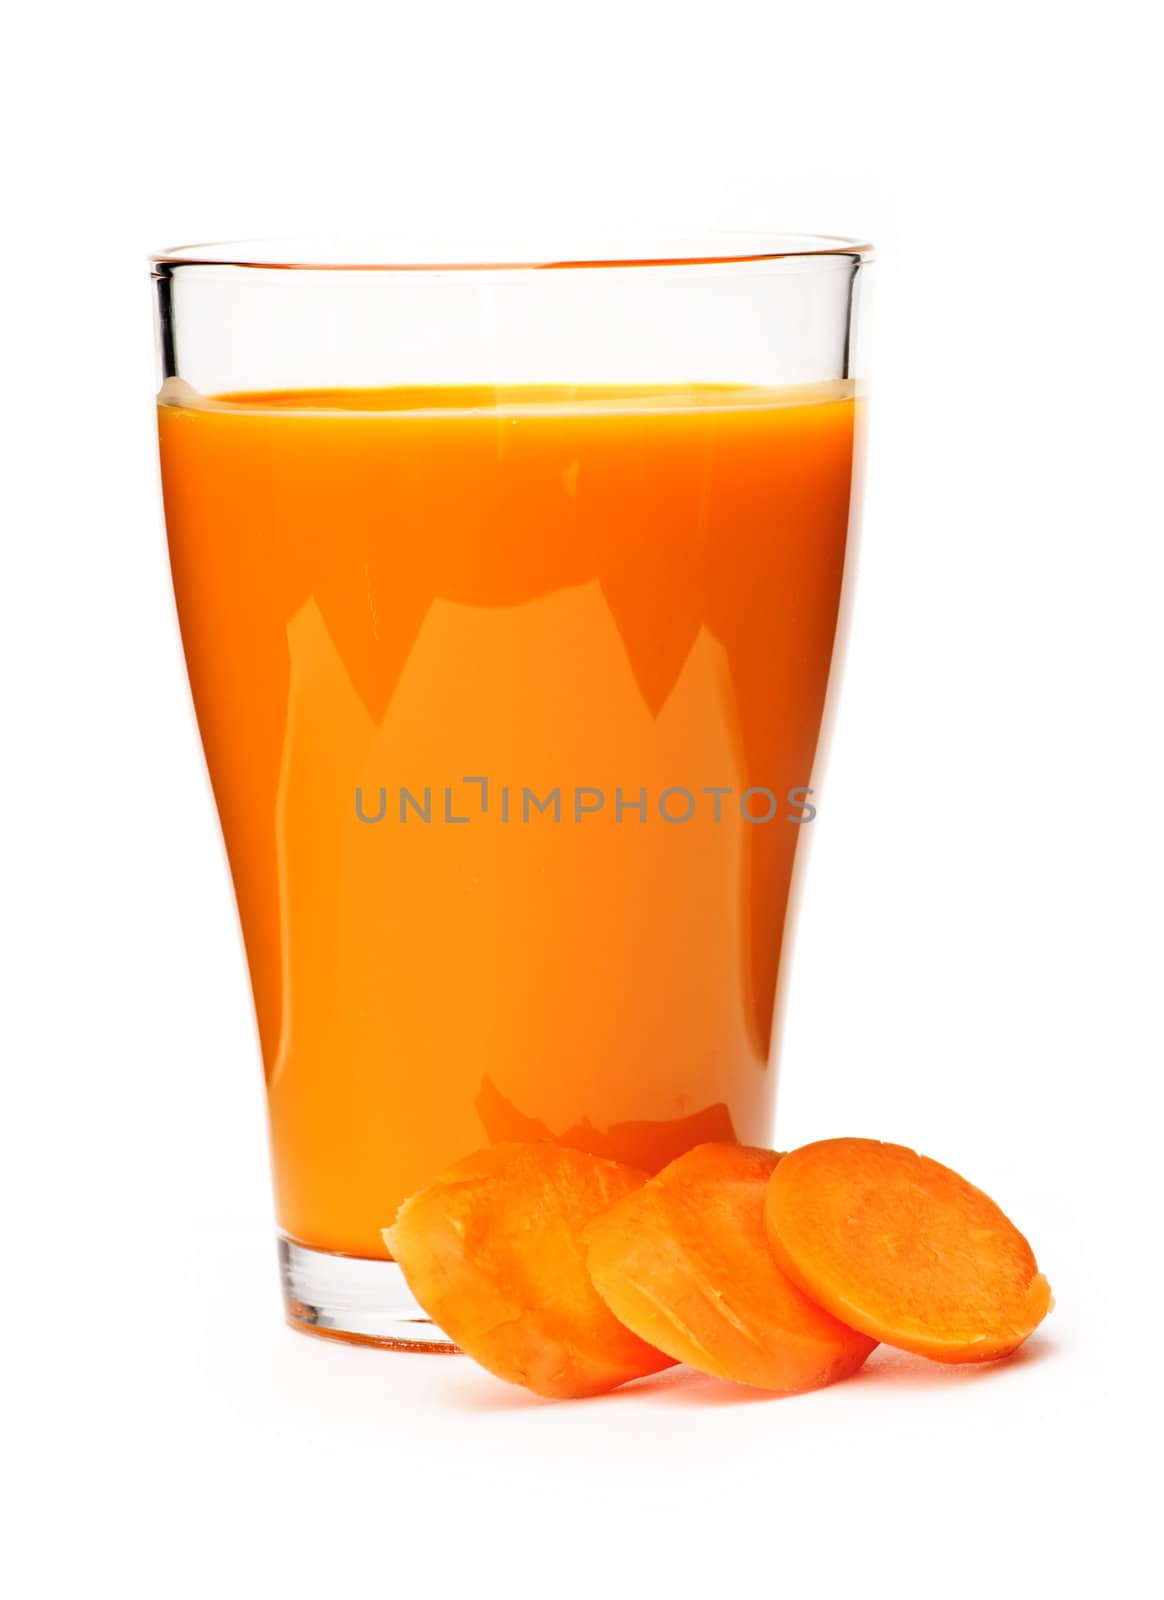 Carrot juice in glass by elenathewise